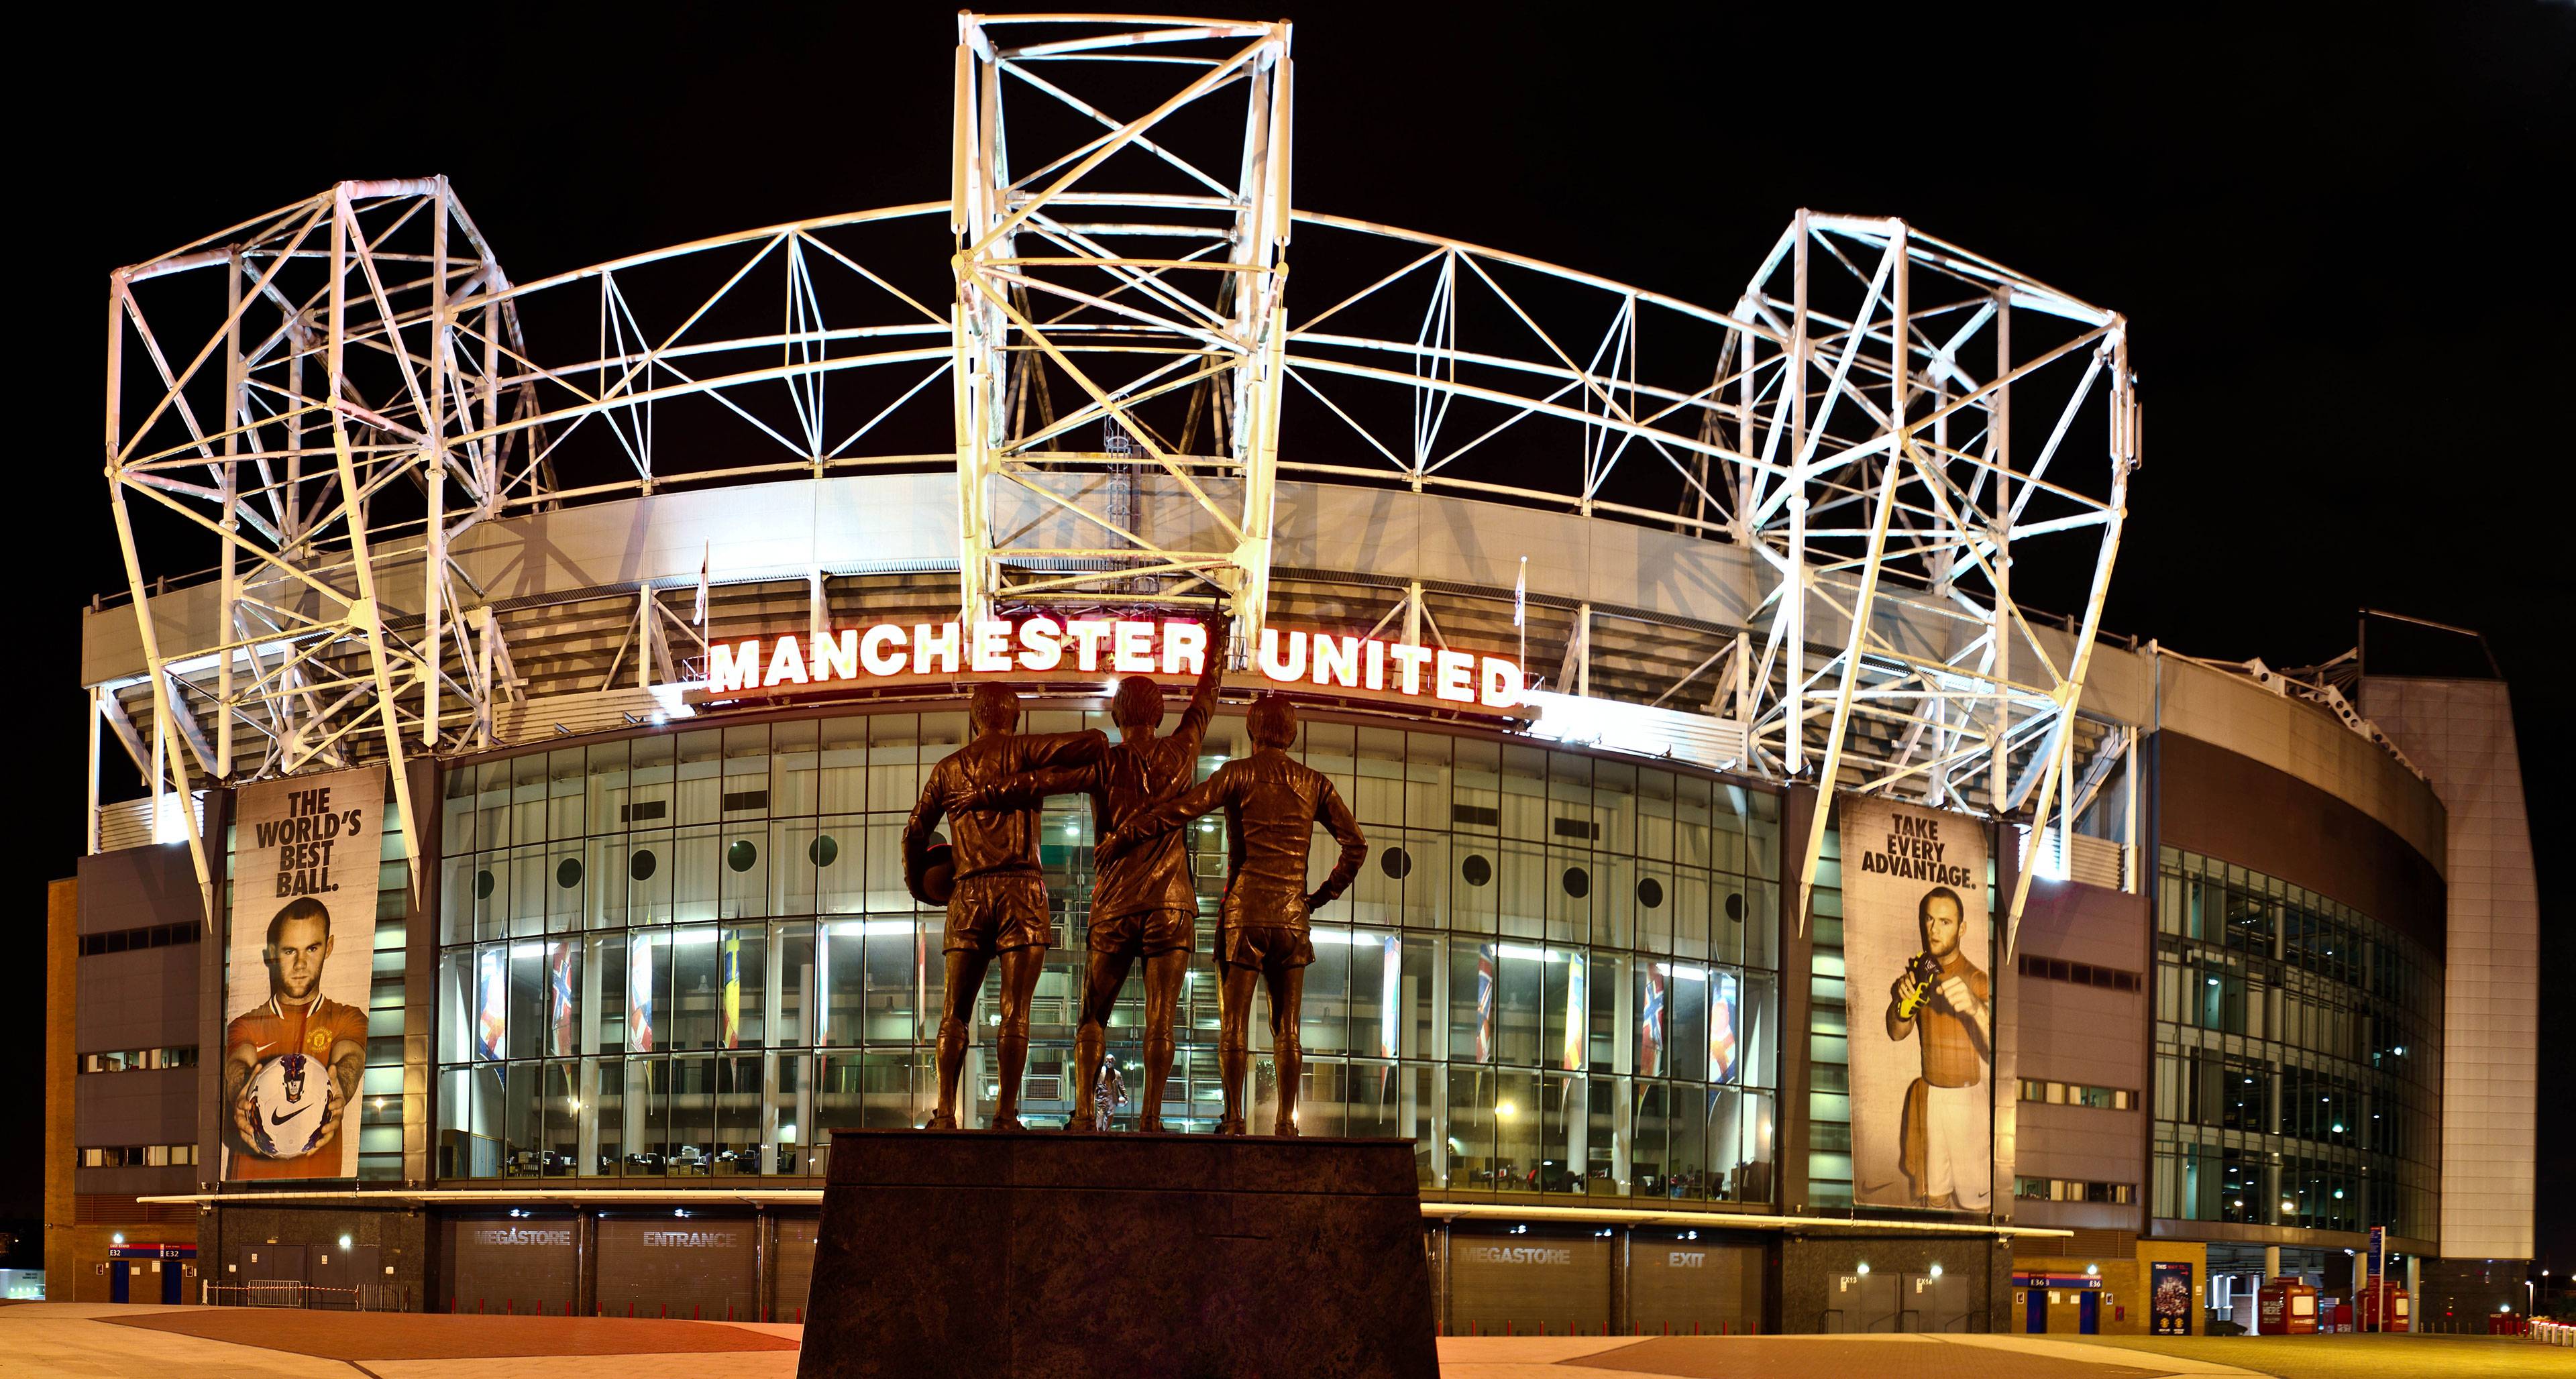 Old Trafford: A cathedral of football, the home of the legendary Manchester United. See the image of Old Trafford to appreciate the history and tradition that has made this stadium a true icon of the sport.